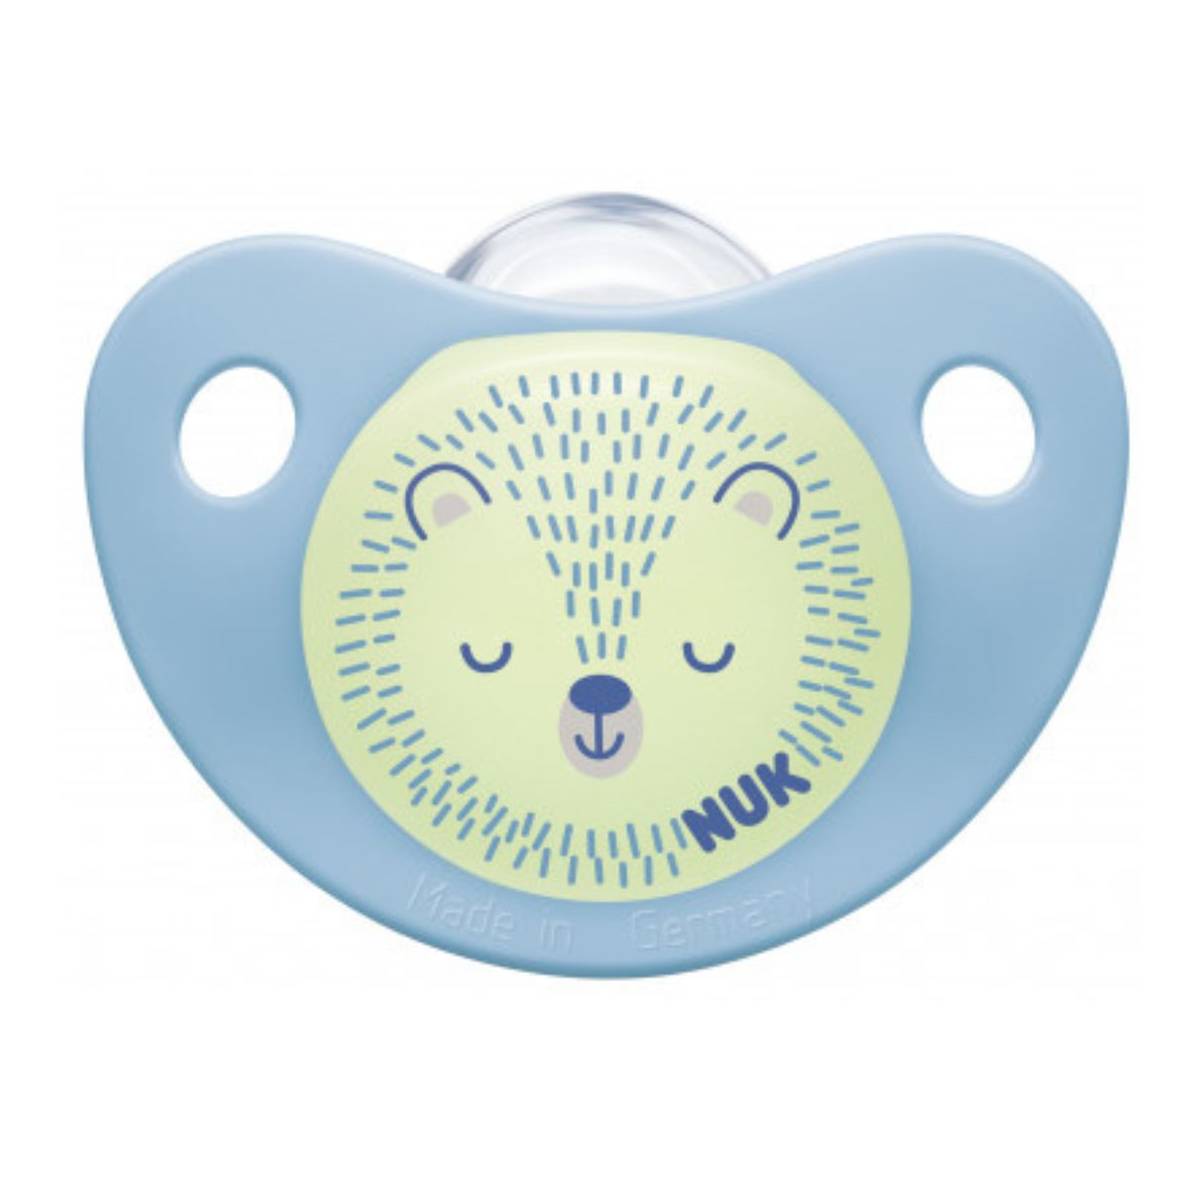 NUK Space Night & Day Tétines - 18-36 mois - Suc…